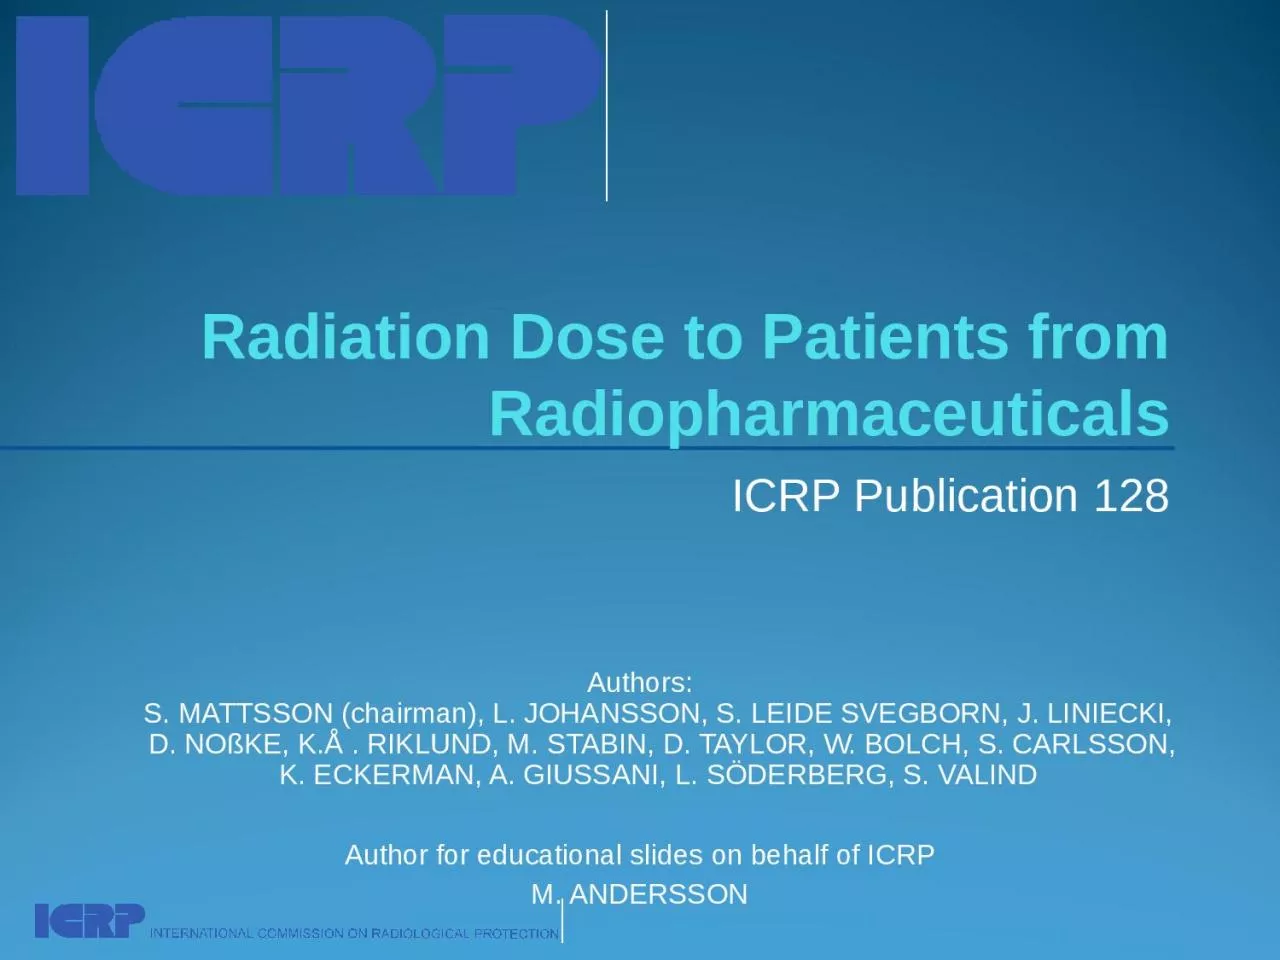 Radiation Dose to Patients from Radiopharmaceuticals